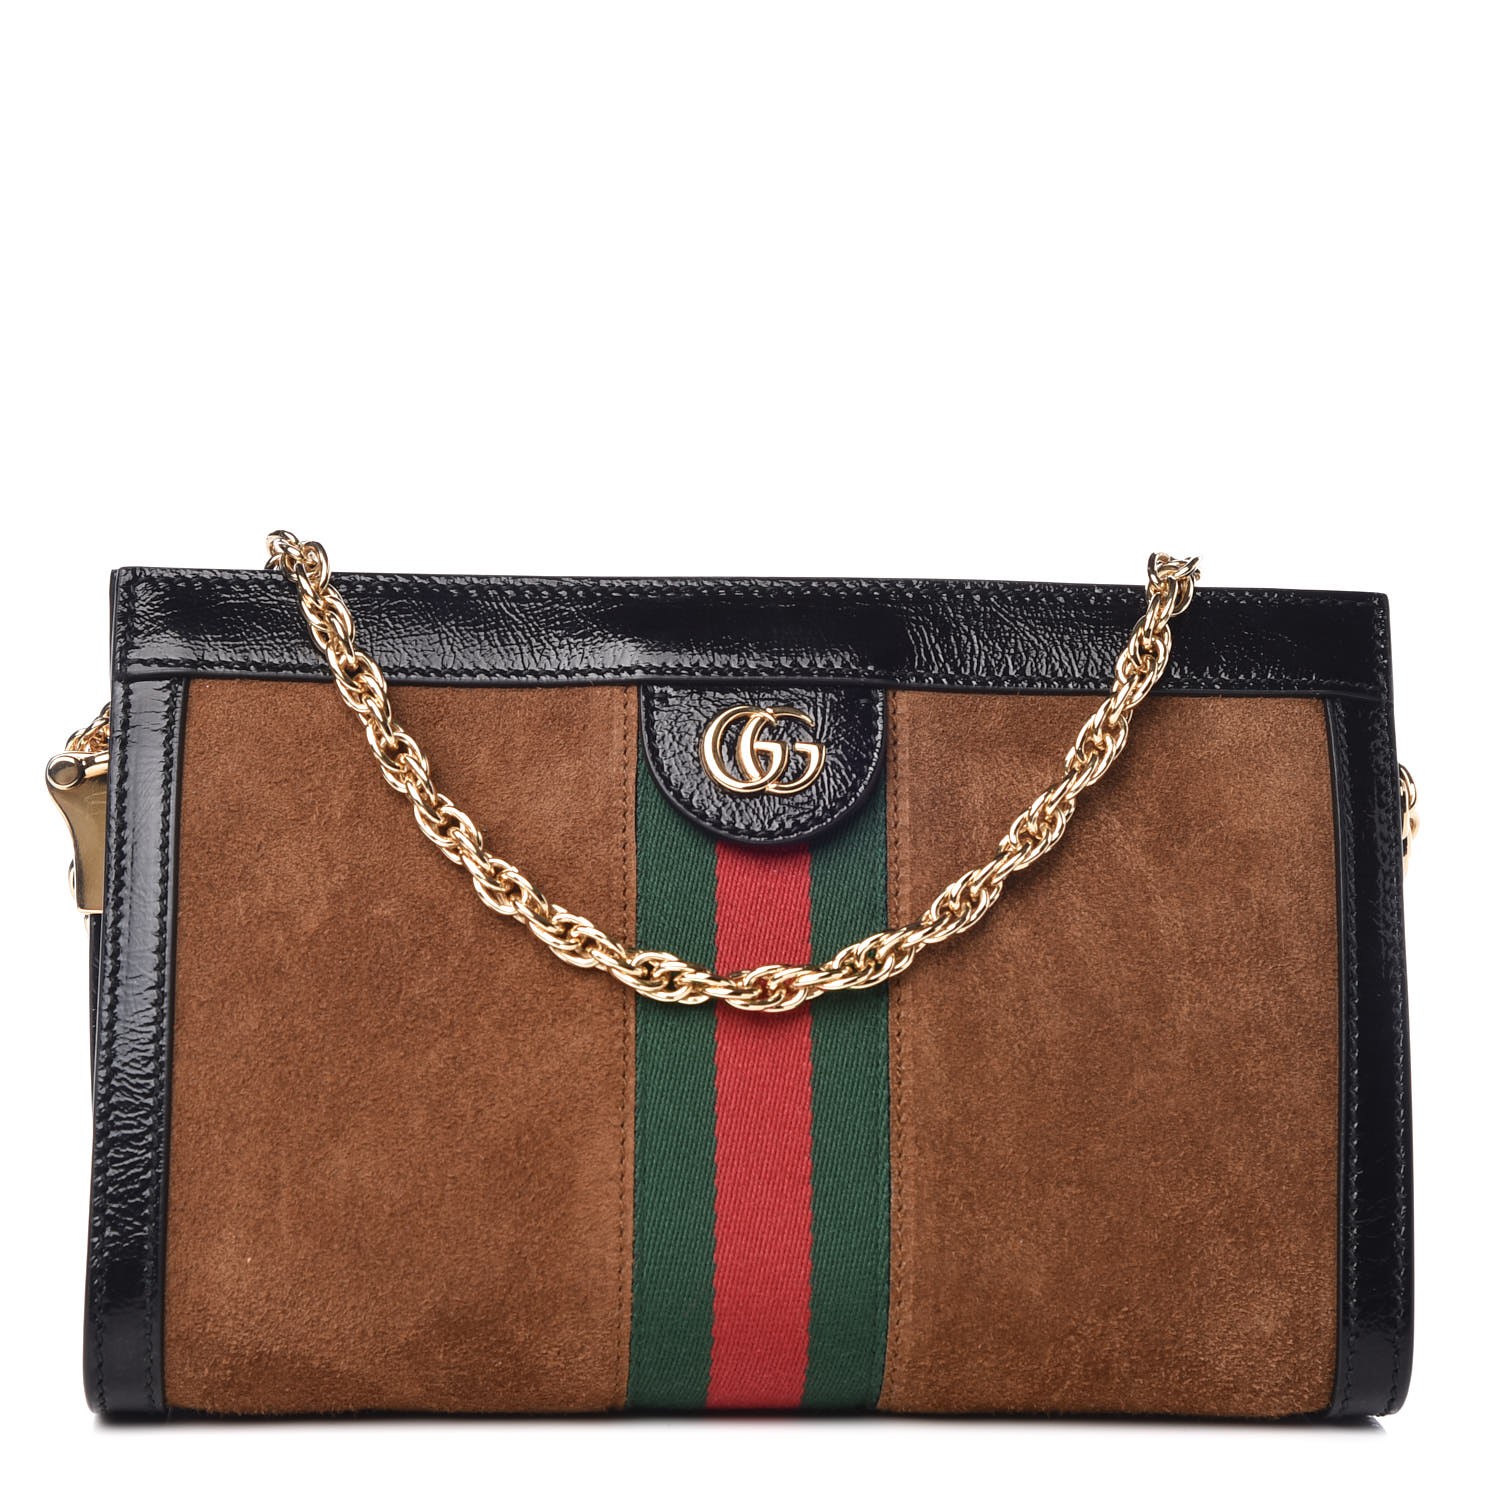 GUCCI Suede Patent GG Web Small Ophidia Shoulder Bag Brown Black 335980